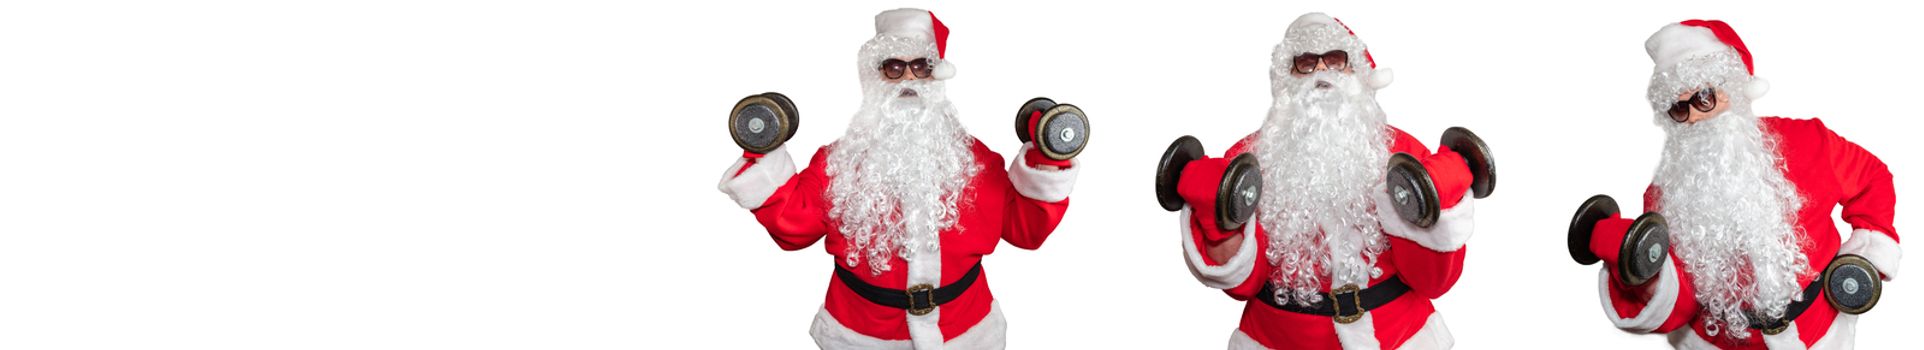 Three Santa Clauses working out, pushing and lifting dumbbells, doing bicep curls. Isolated on white background. Sport, fitness, bodybuilding conept. Banner size, copy space.